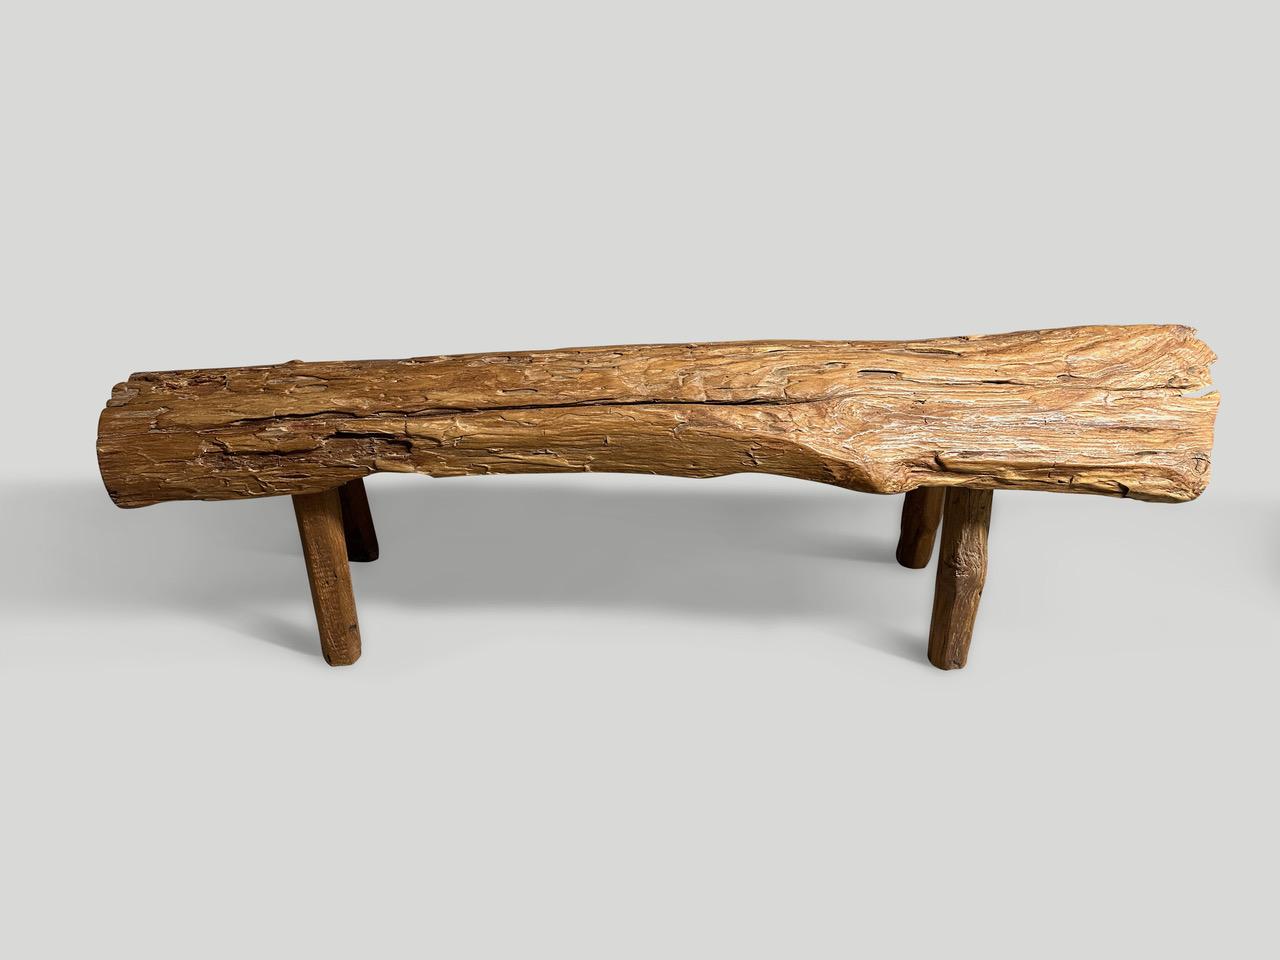 Antique bench with beautiful character hand made from a single thick teak log with lovely patina. Both usable and sculptural. Circa 1950.

This bench was hand made in the spirit of Wabi-Sabi, a Japanese philosophy that beauty can be found in